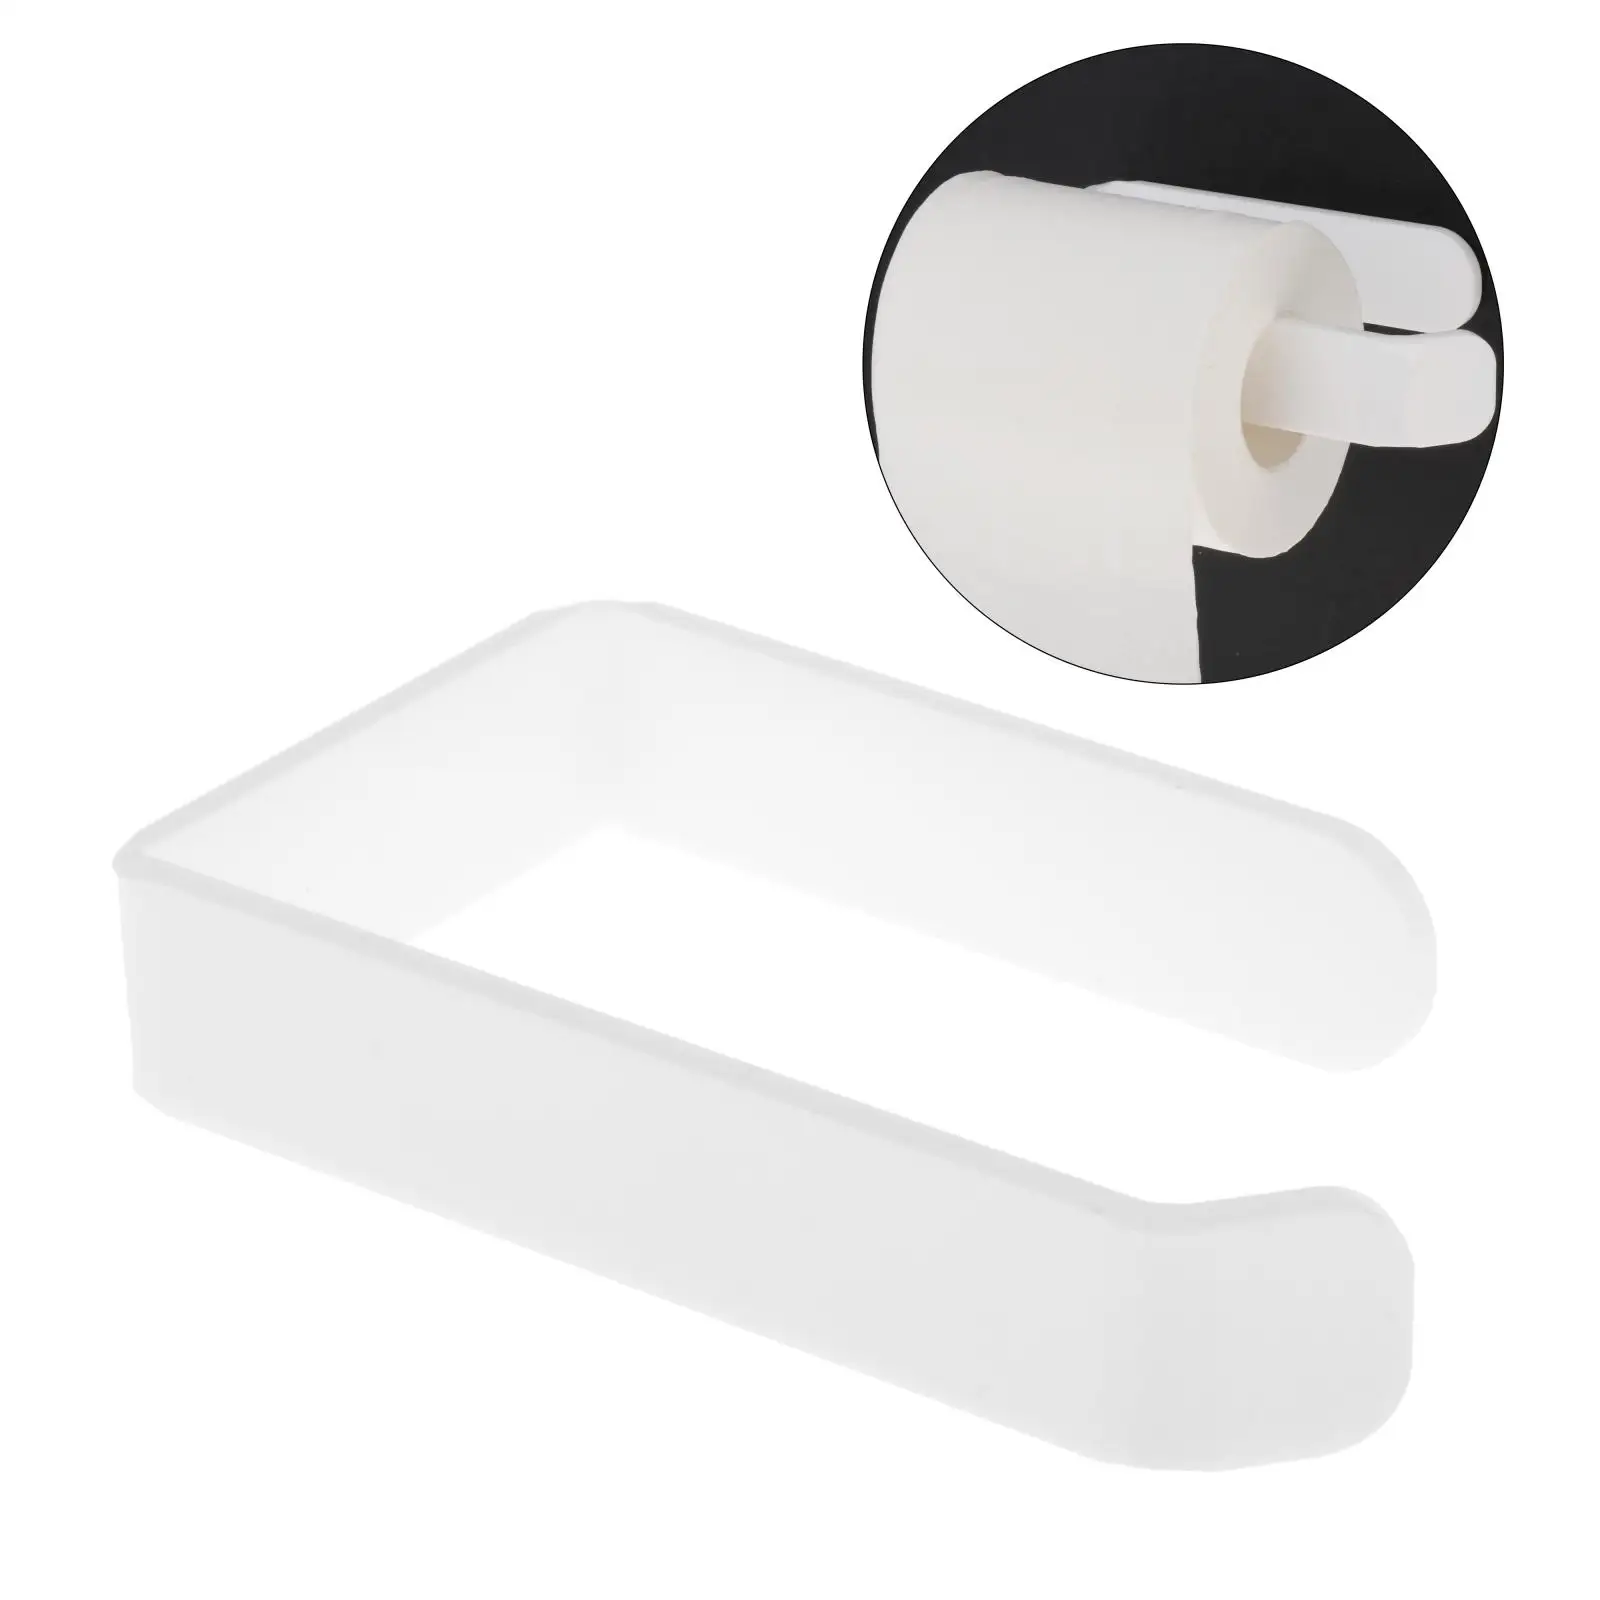 Wall Mount Paper Holder, White Acrylic Toilet Tissue Roll Holders Hangers, for Bathroom Kitchen, Easy to Install, for Wall Tile